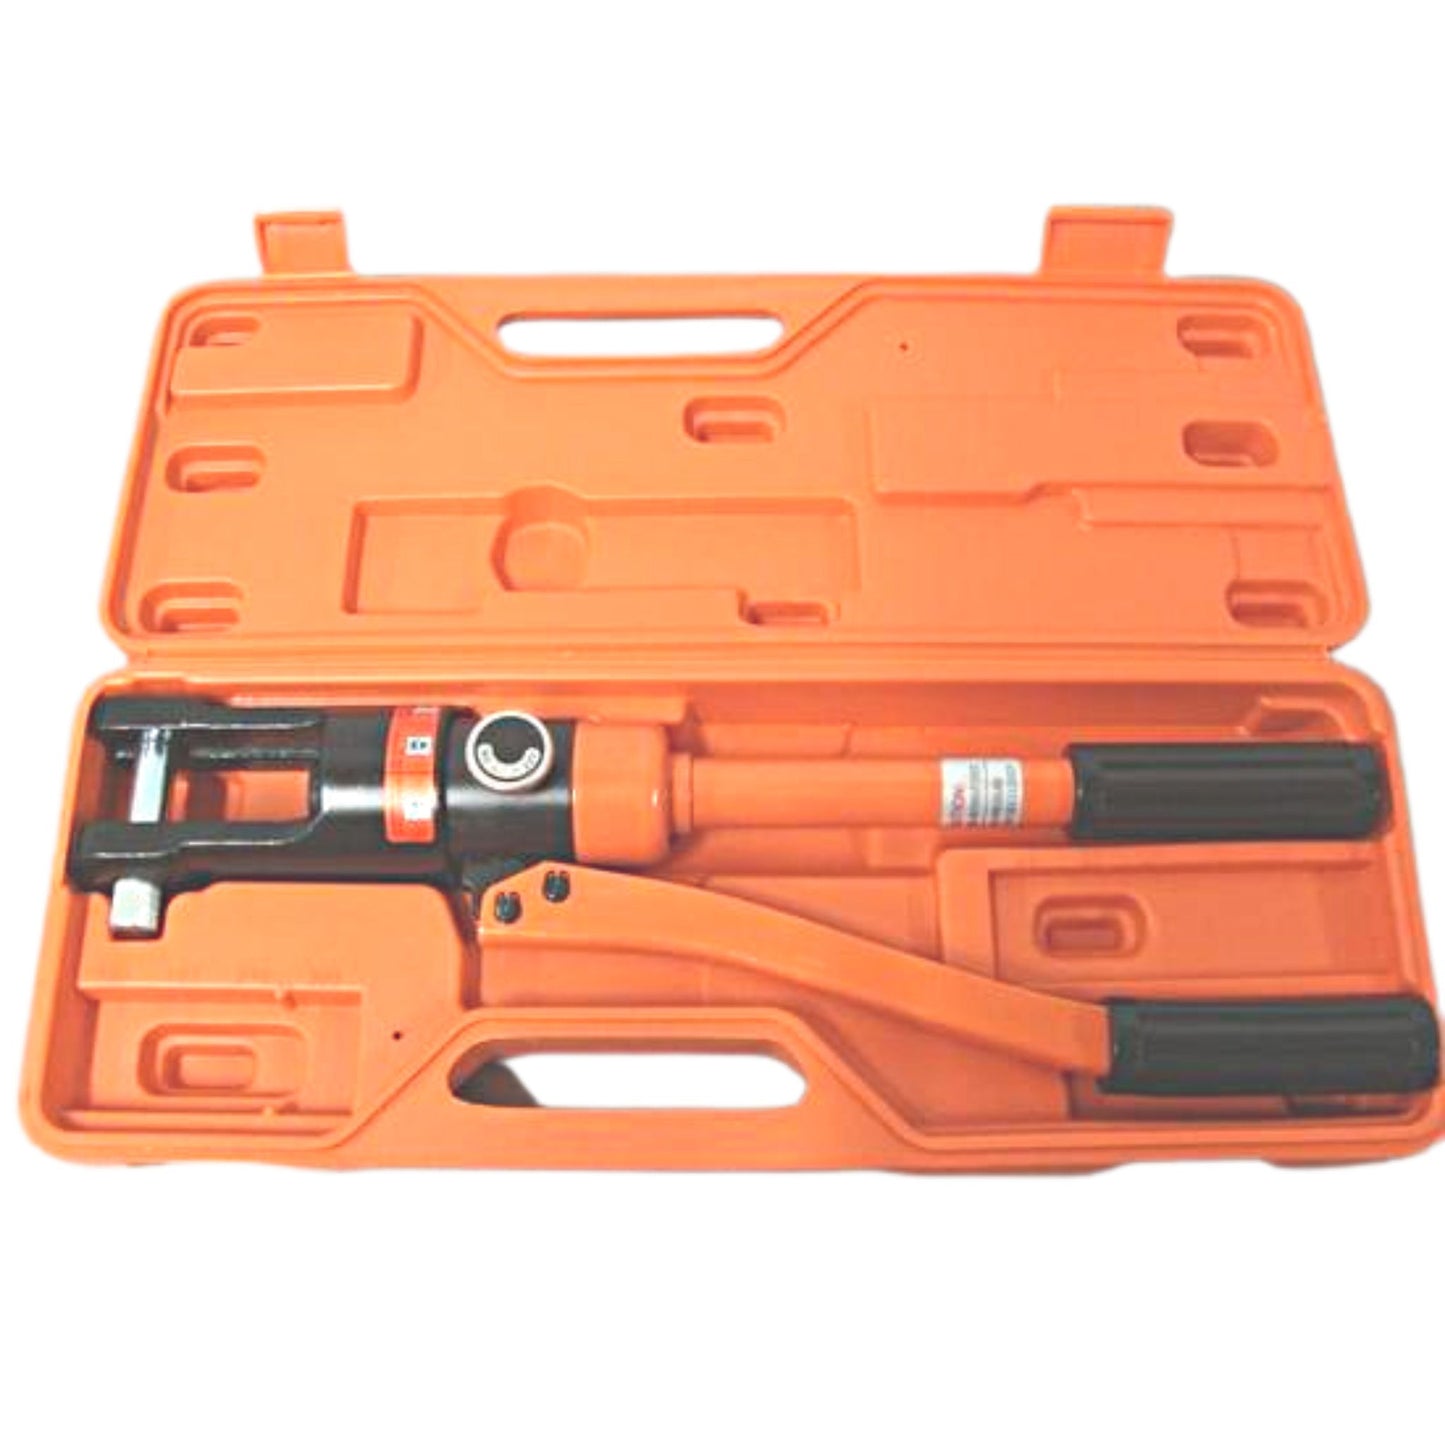 Hydraulic Crimping Tool Hire For 4 mm Cable